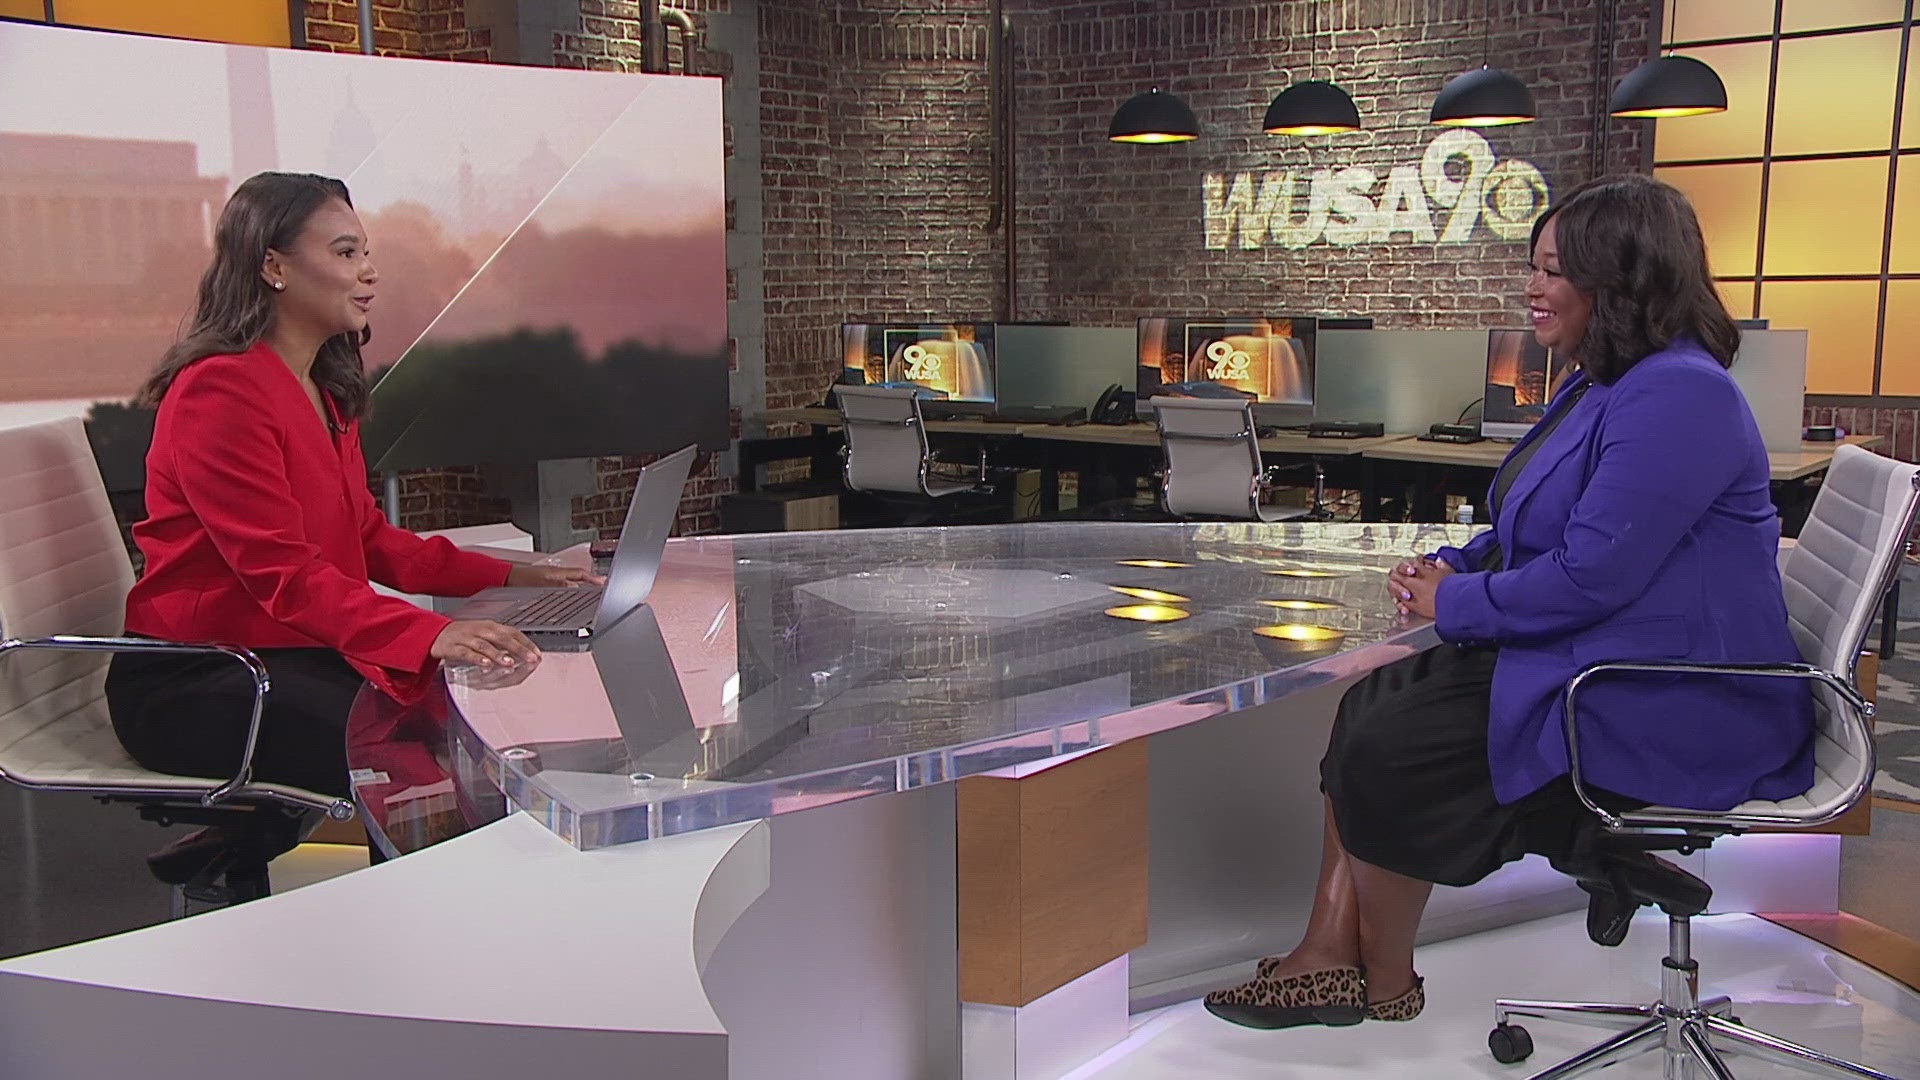 WUSA9 invited Janeese Lewis George, Ward 4 Councilmember, who provided key details on the need for creating and expanding new bus routes in the nation's capital.